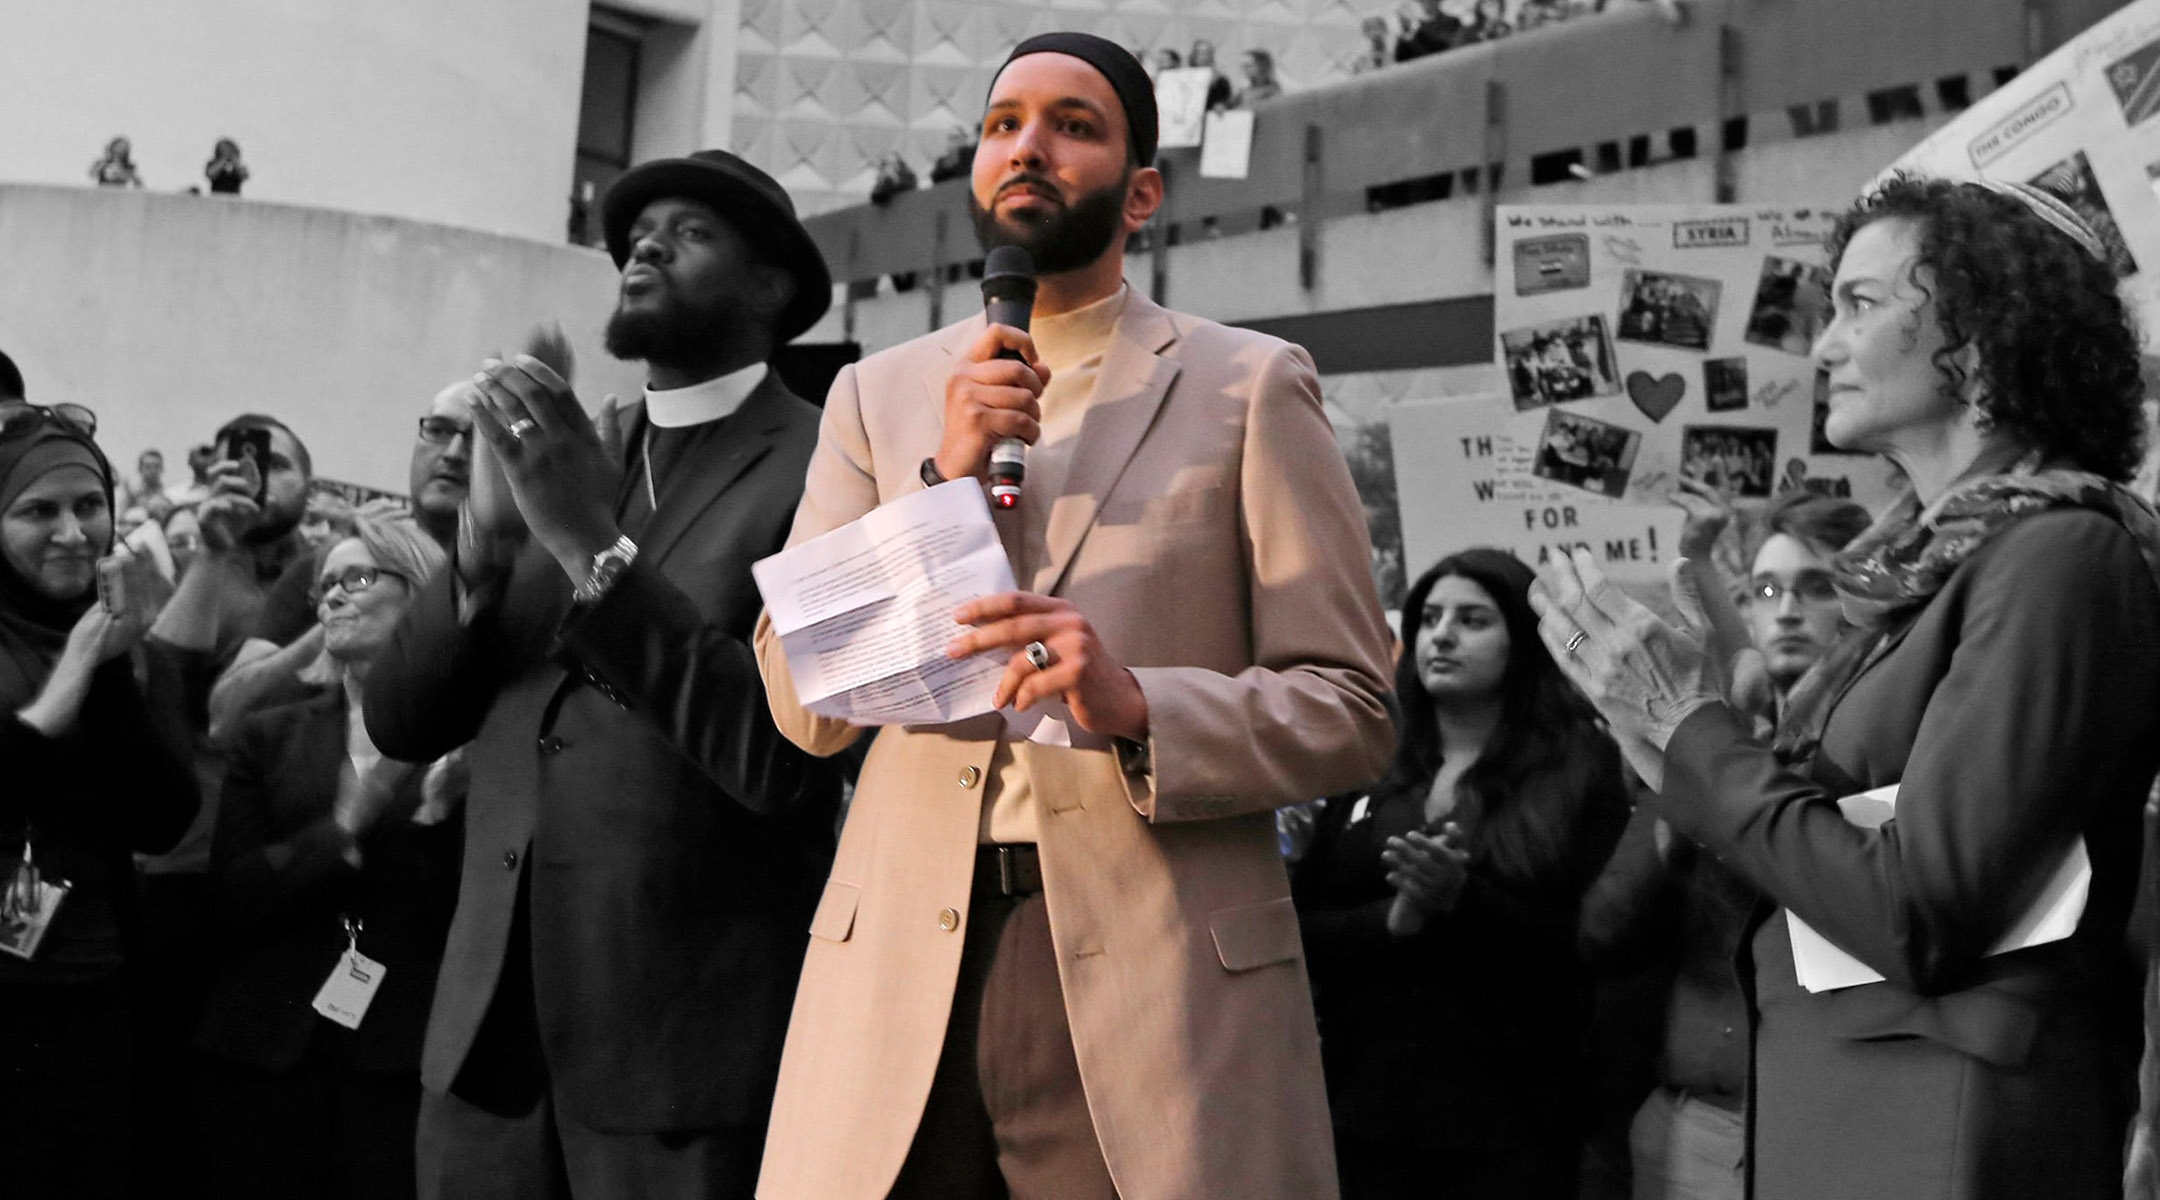 Rising star Imam Omar Suleiman has an antiSemitic past. Has he moved